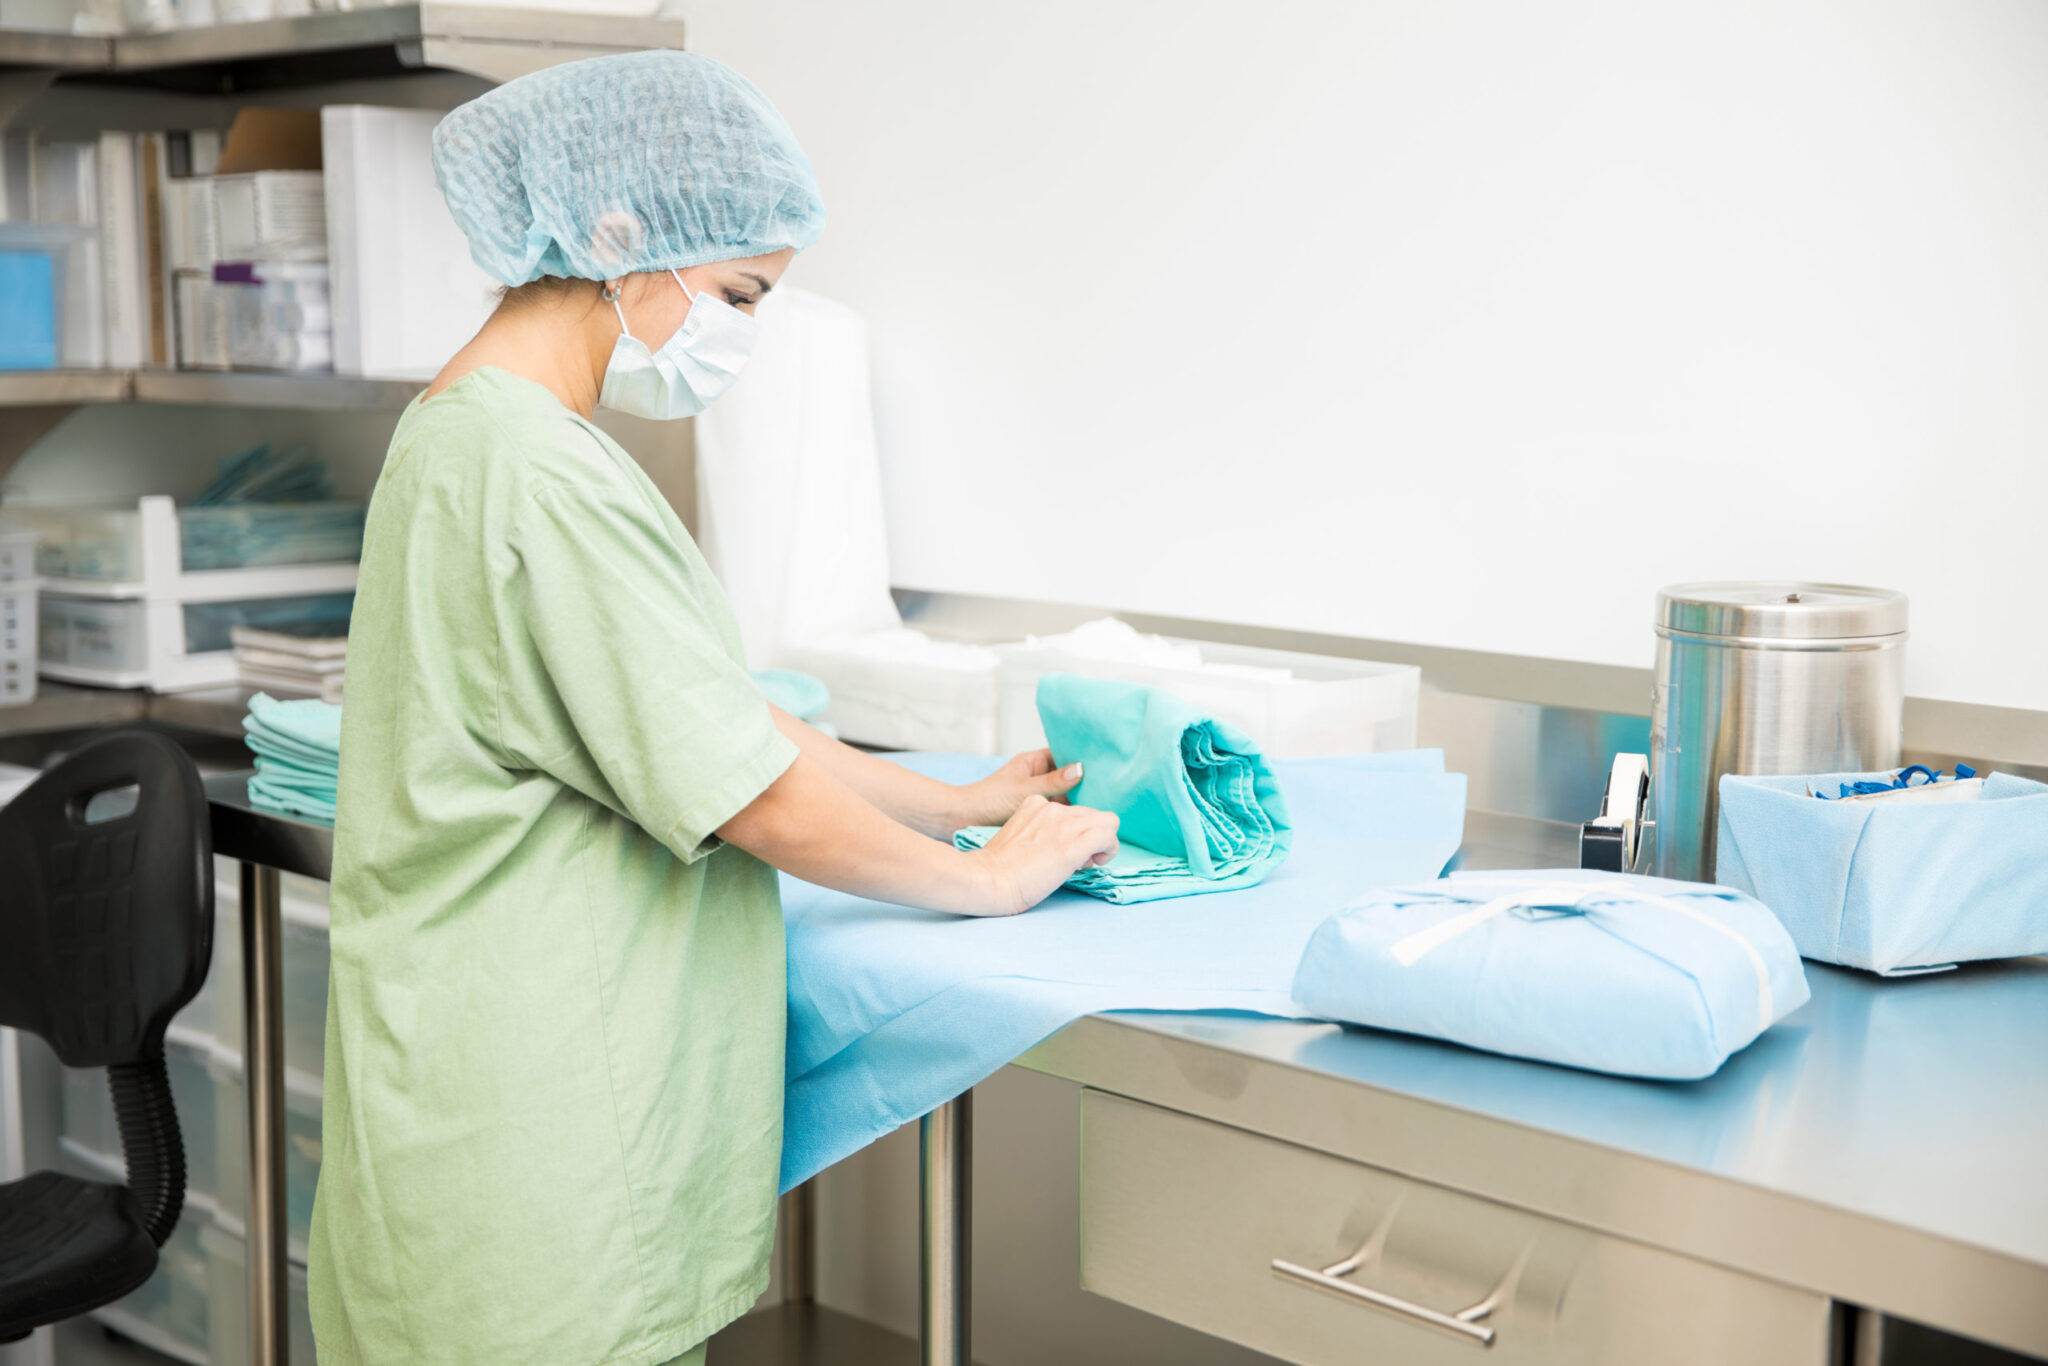 Hospital Wipes: How Effective Are Wipes in Healthcare Facilities?